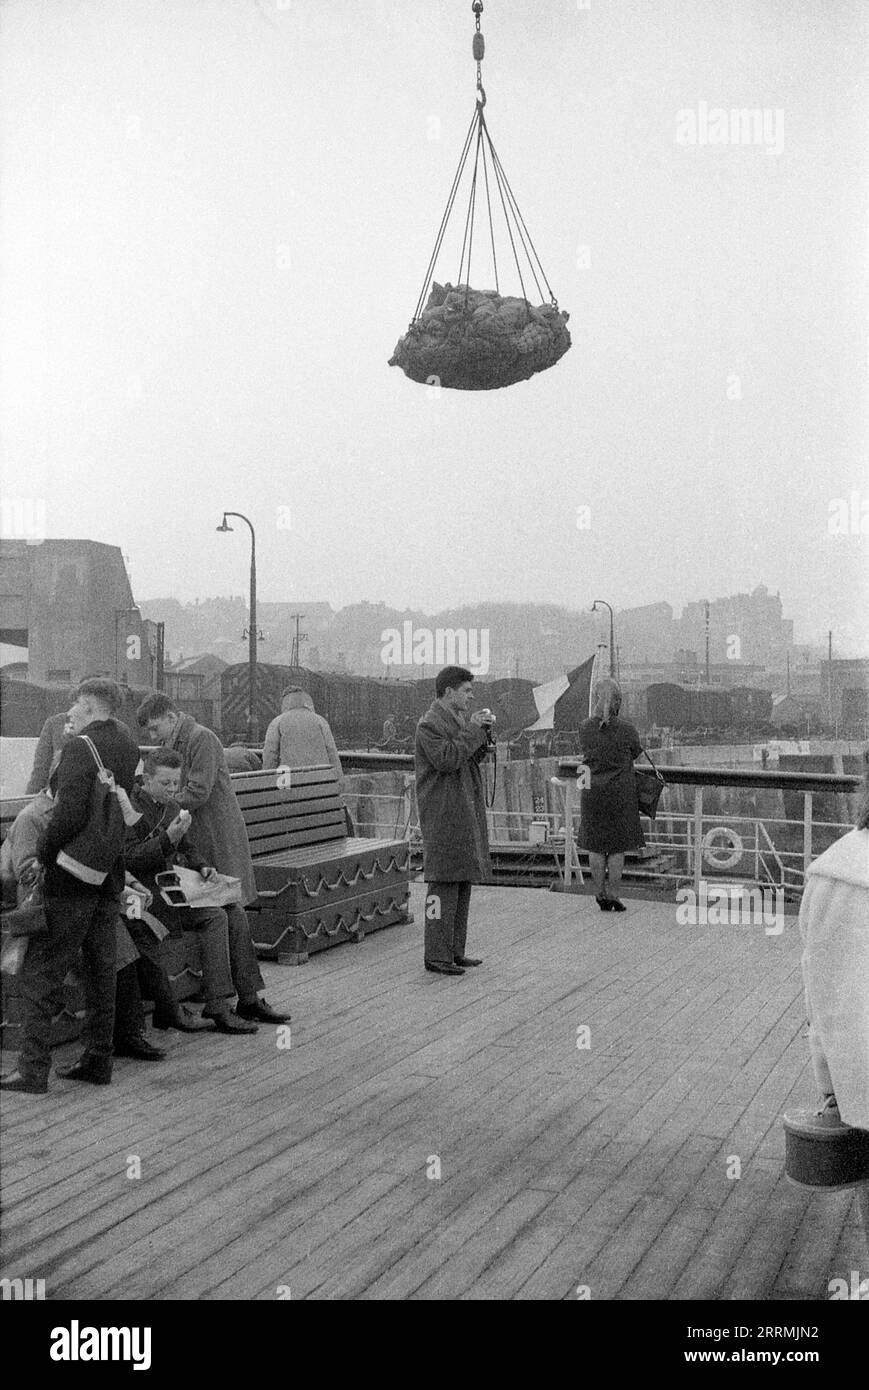 Kent. c.1960 – Passengers on the deck of a French cross-channel ferry at Folkestone Harbour, next to the Folkestone Harbour Railway Station on the harbour arm. Cargo is being transferred onto the ferry by a quay crane. A group of teenage boys are sitting on a bench, eating lunch. The benches double as life rafts. A man is taking photographs with his camera. Stock Photo